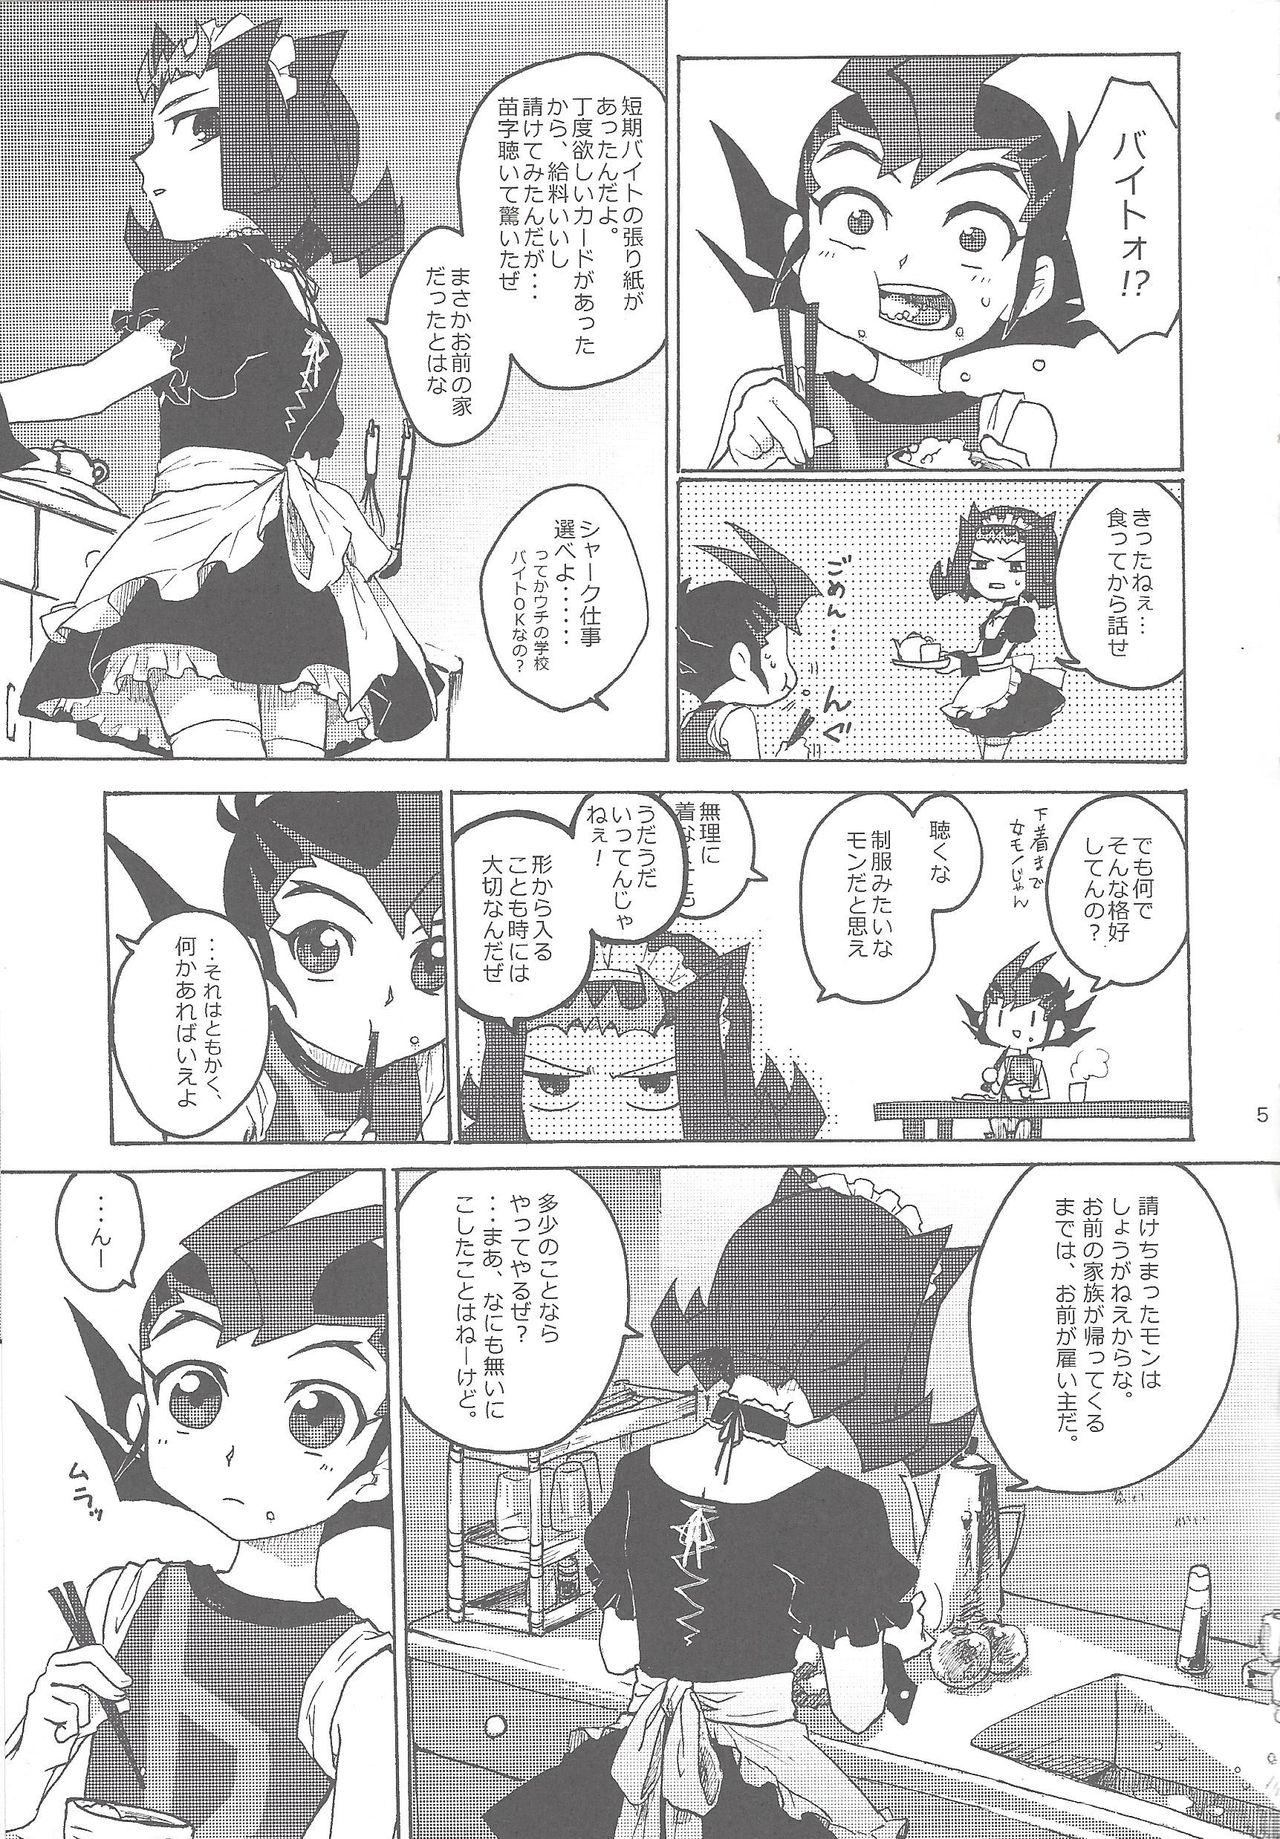 Pussy Sex XtasYZ Summon - Yu gi oh zexal Leaked - Page 6